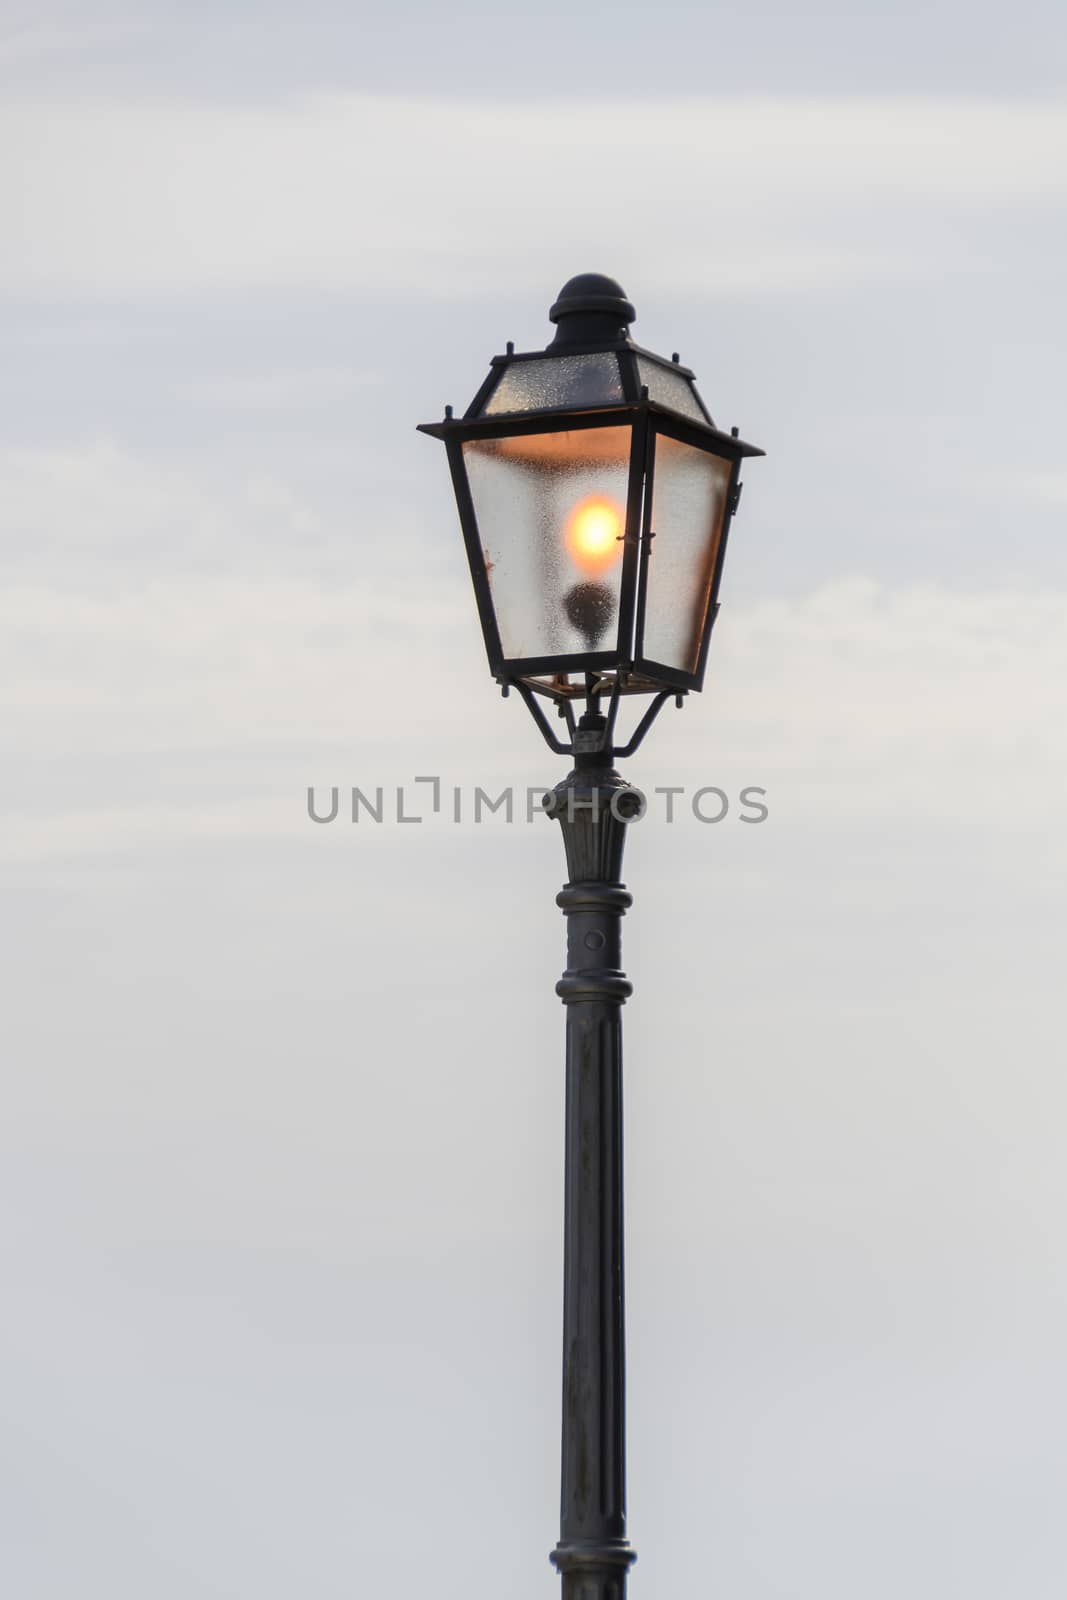 Vintage, old street lamp in classic style, made of cast iron and or metal